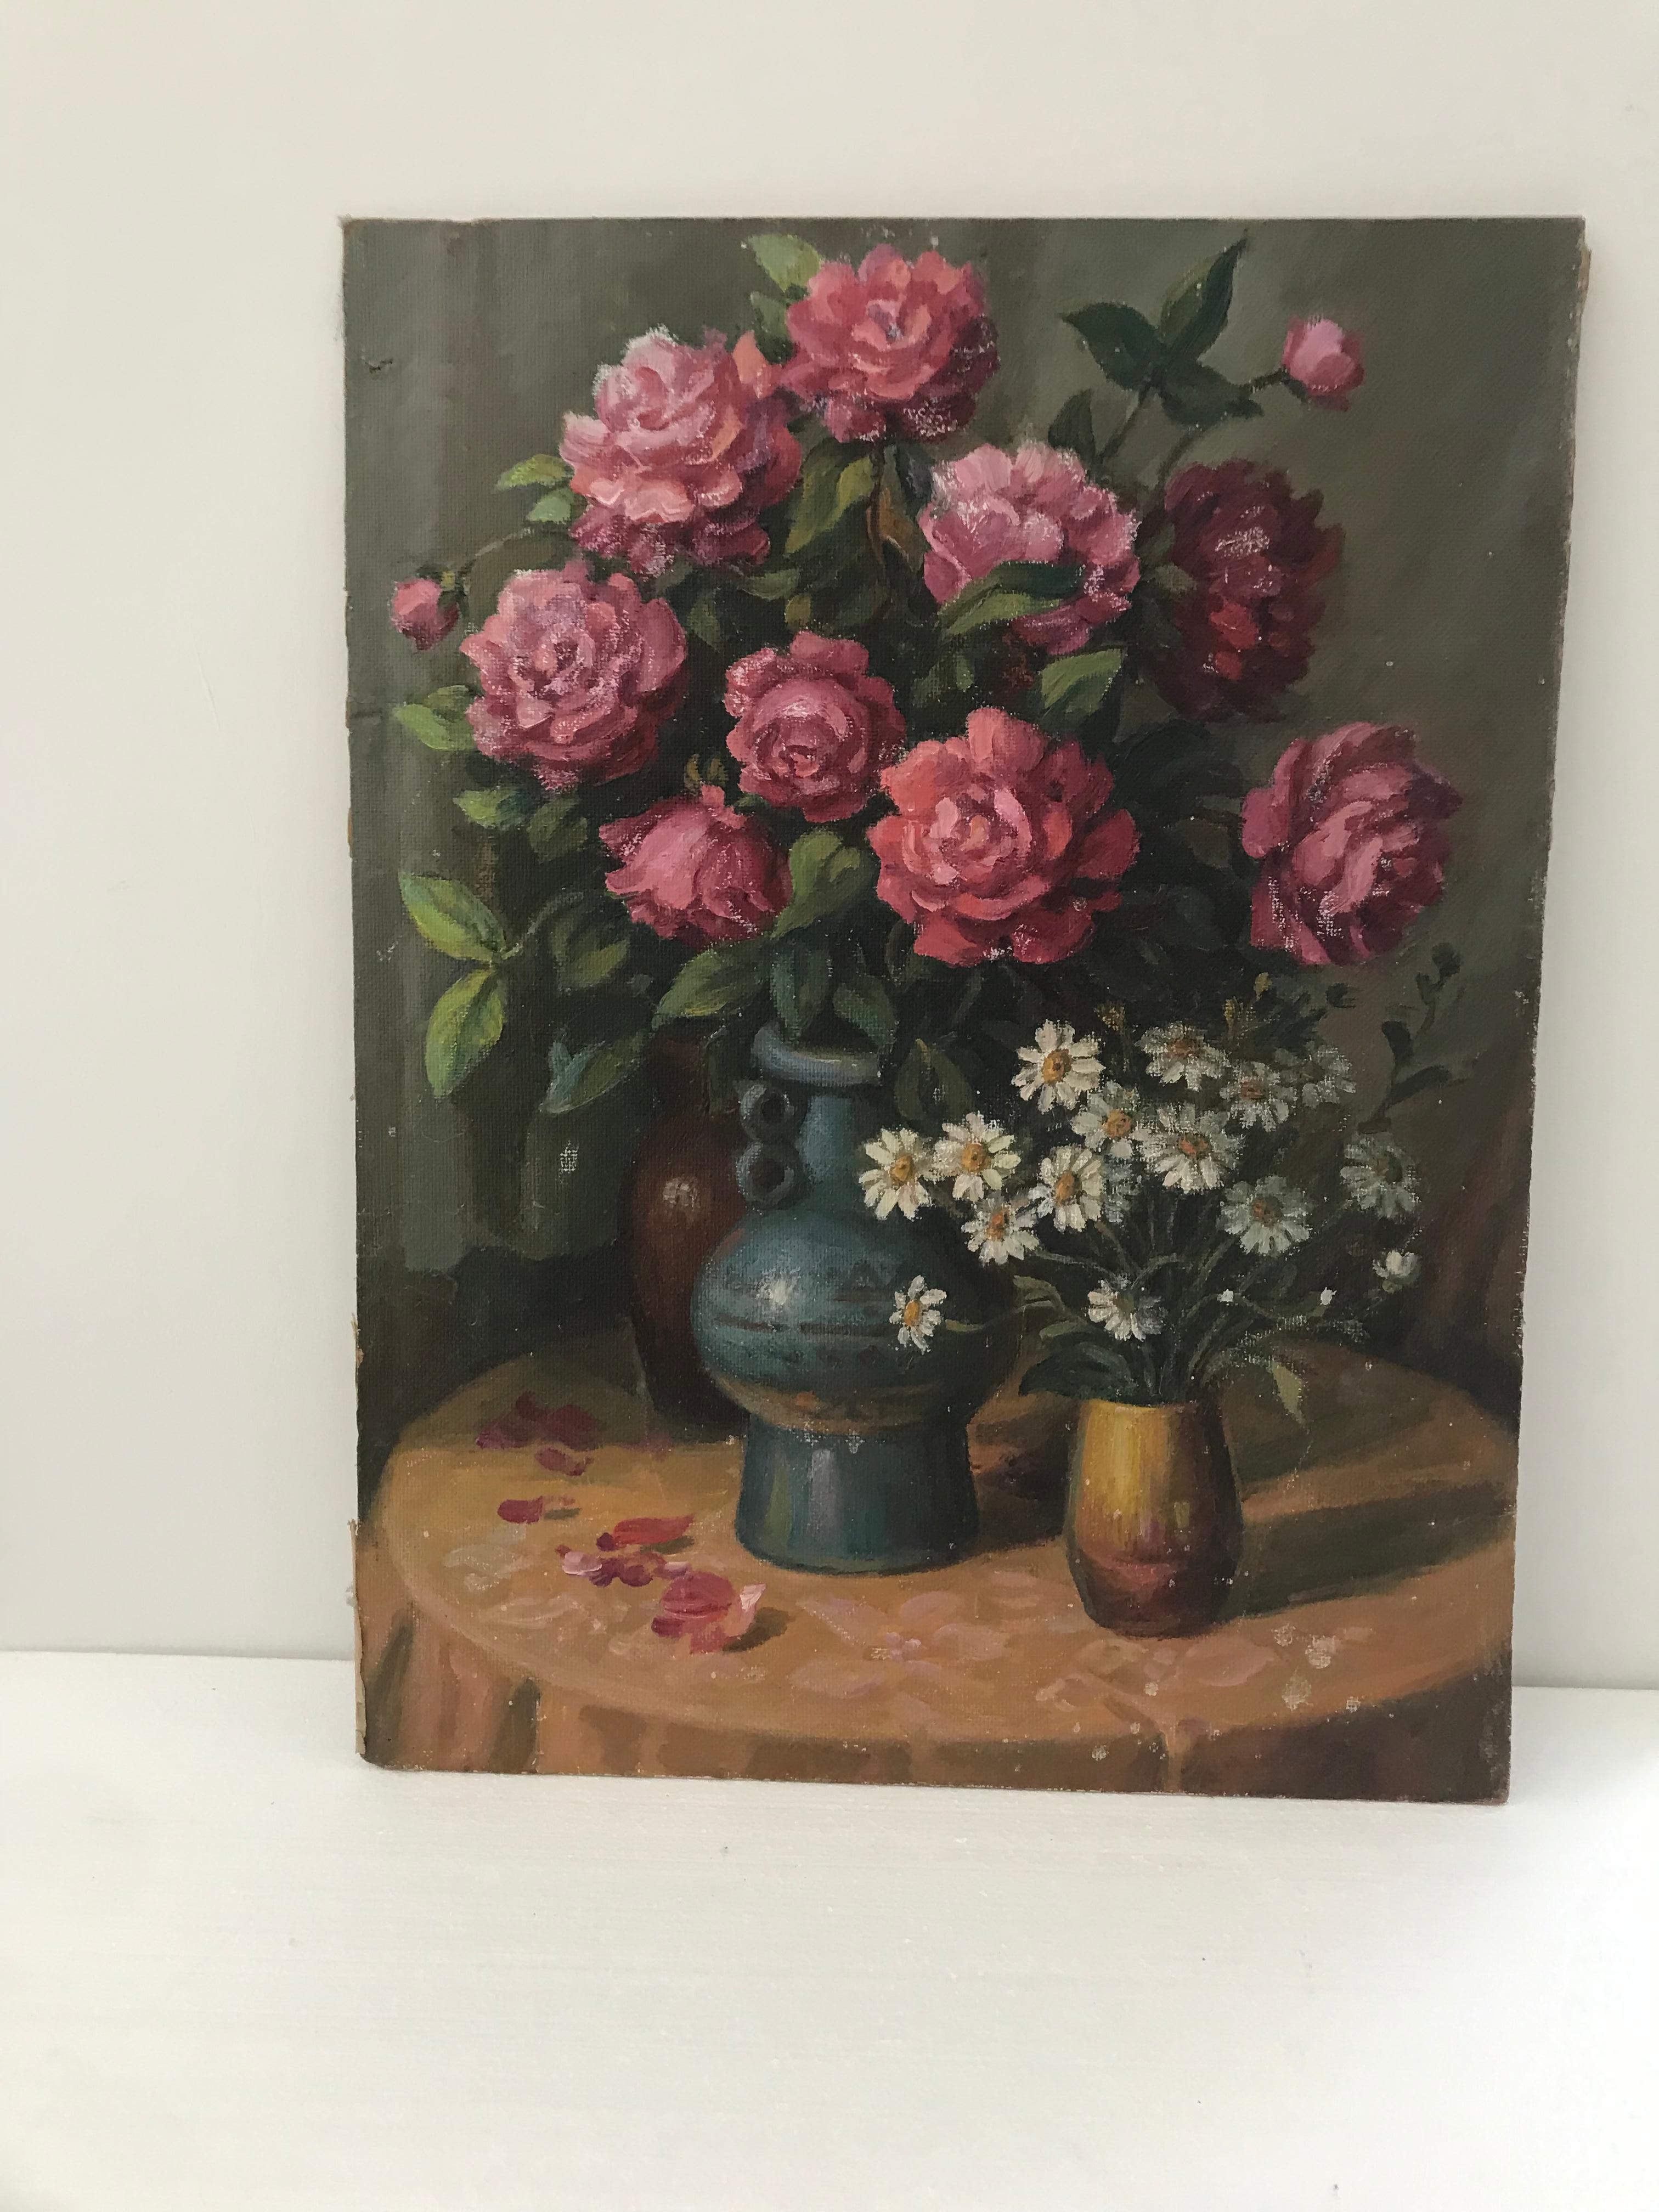 Oil on board painting of roses.